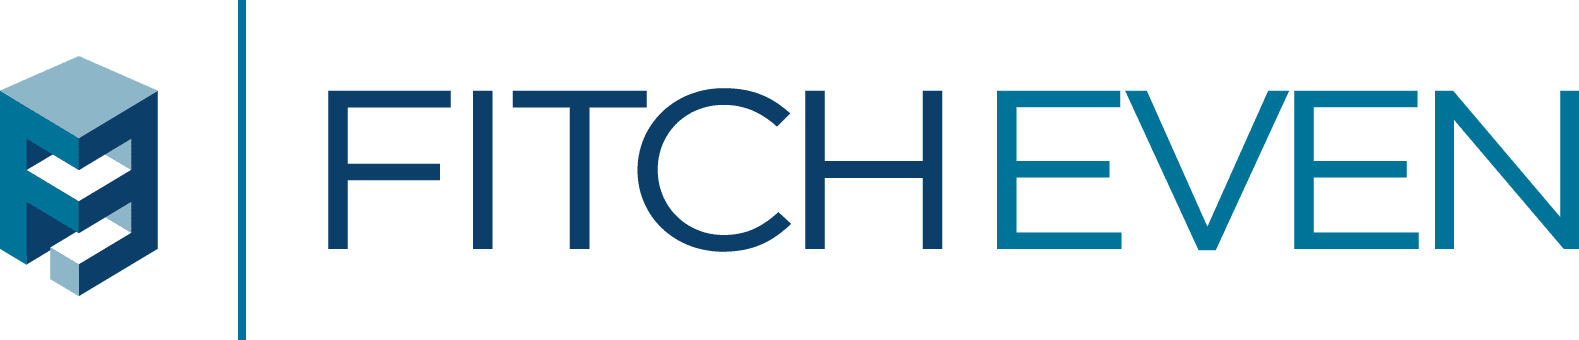 Fitch Even logo